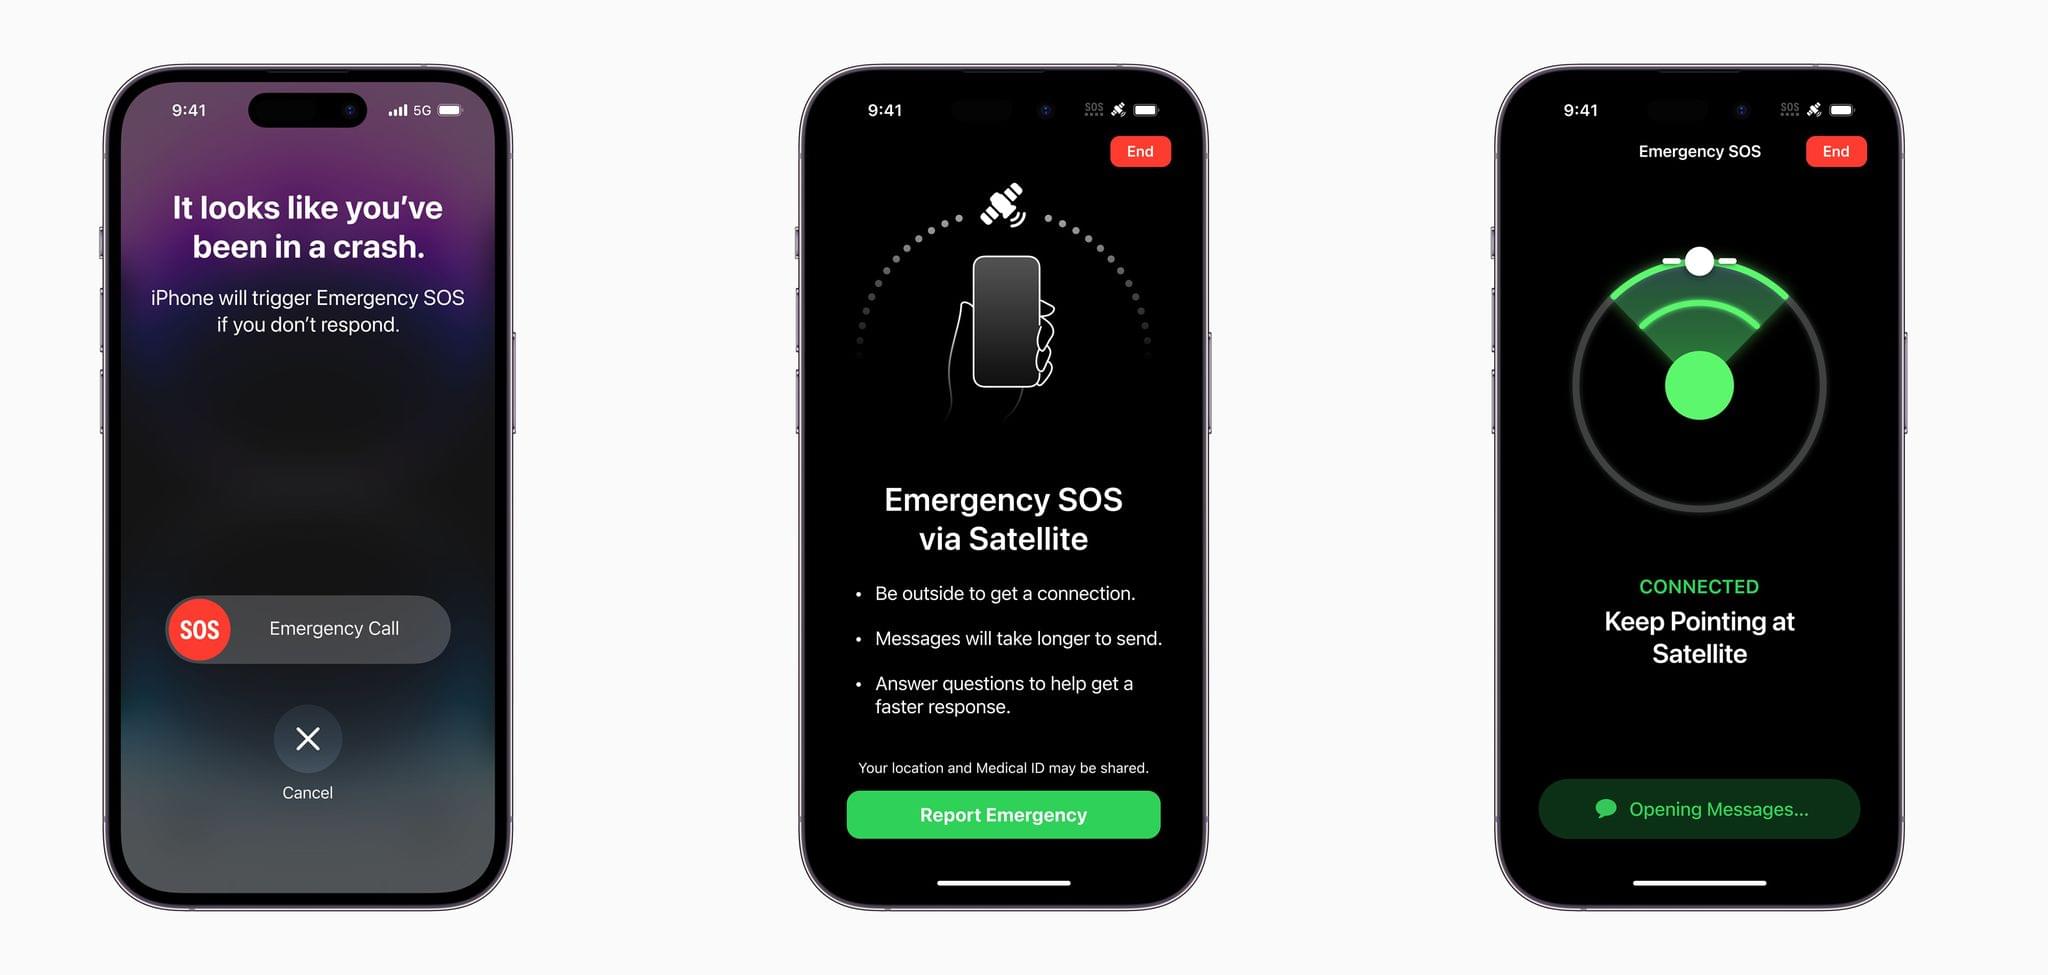 Crash detection and Emergency SOS via Satellite are new safety features coming to all iPhones this year. Source: Apple.